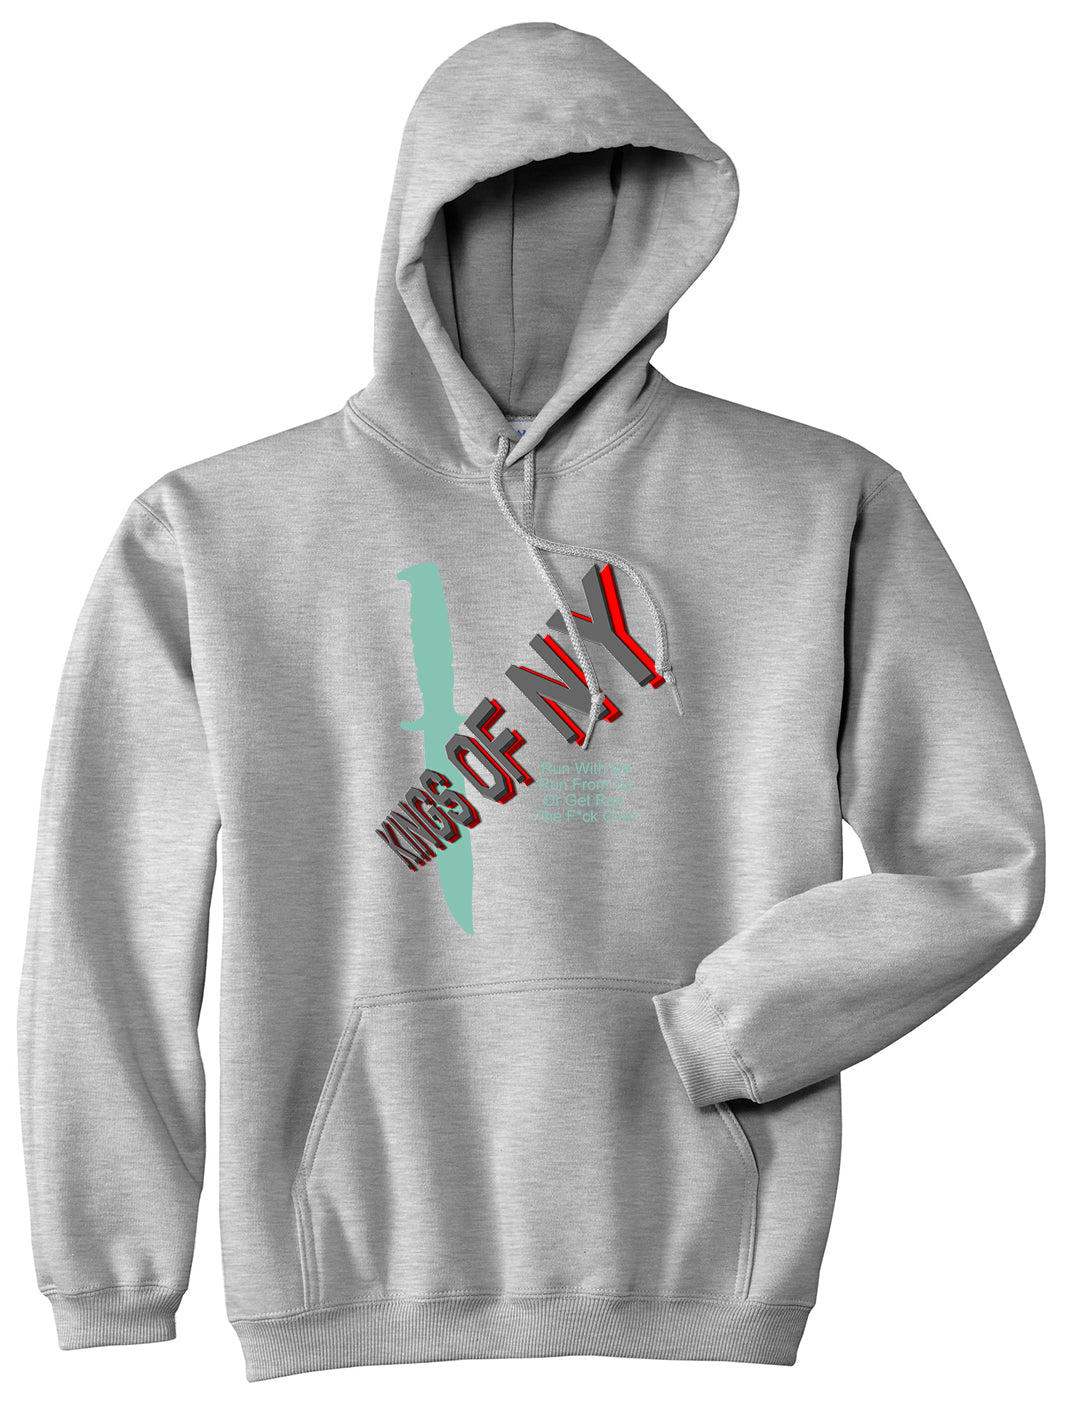 Run With Us Knife Pullover Hoodie in Grey